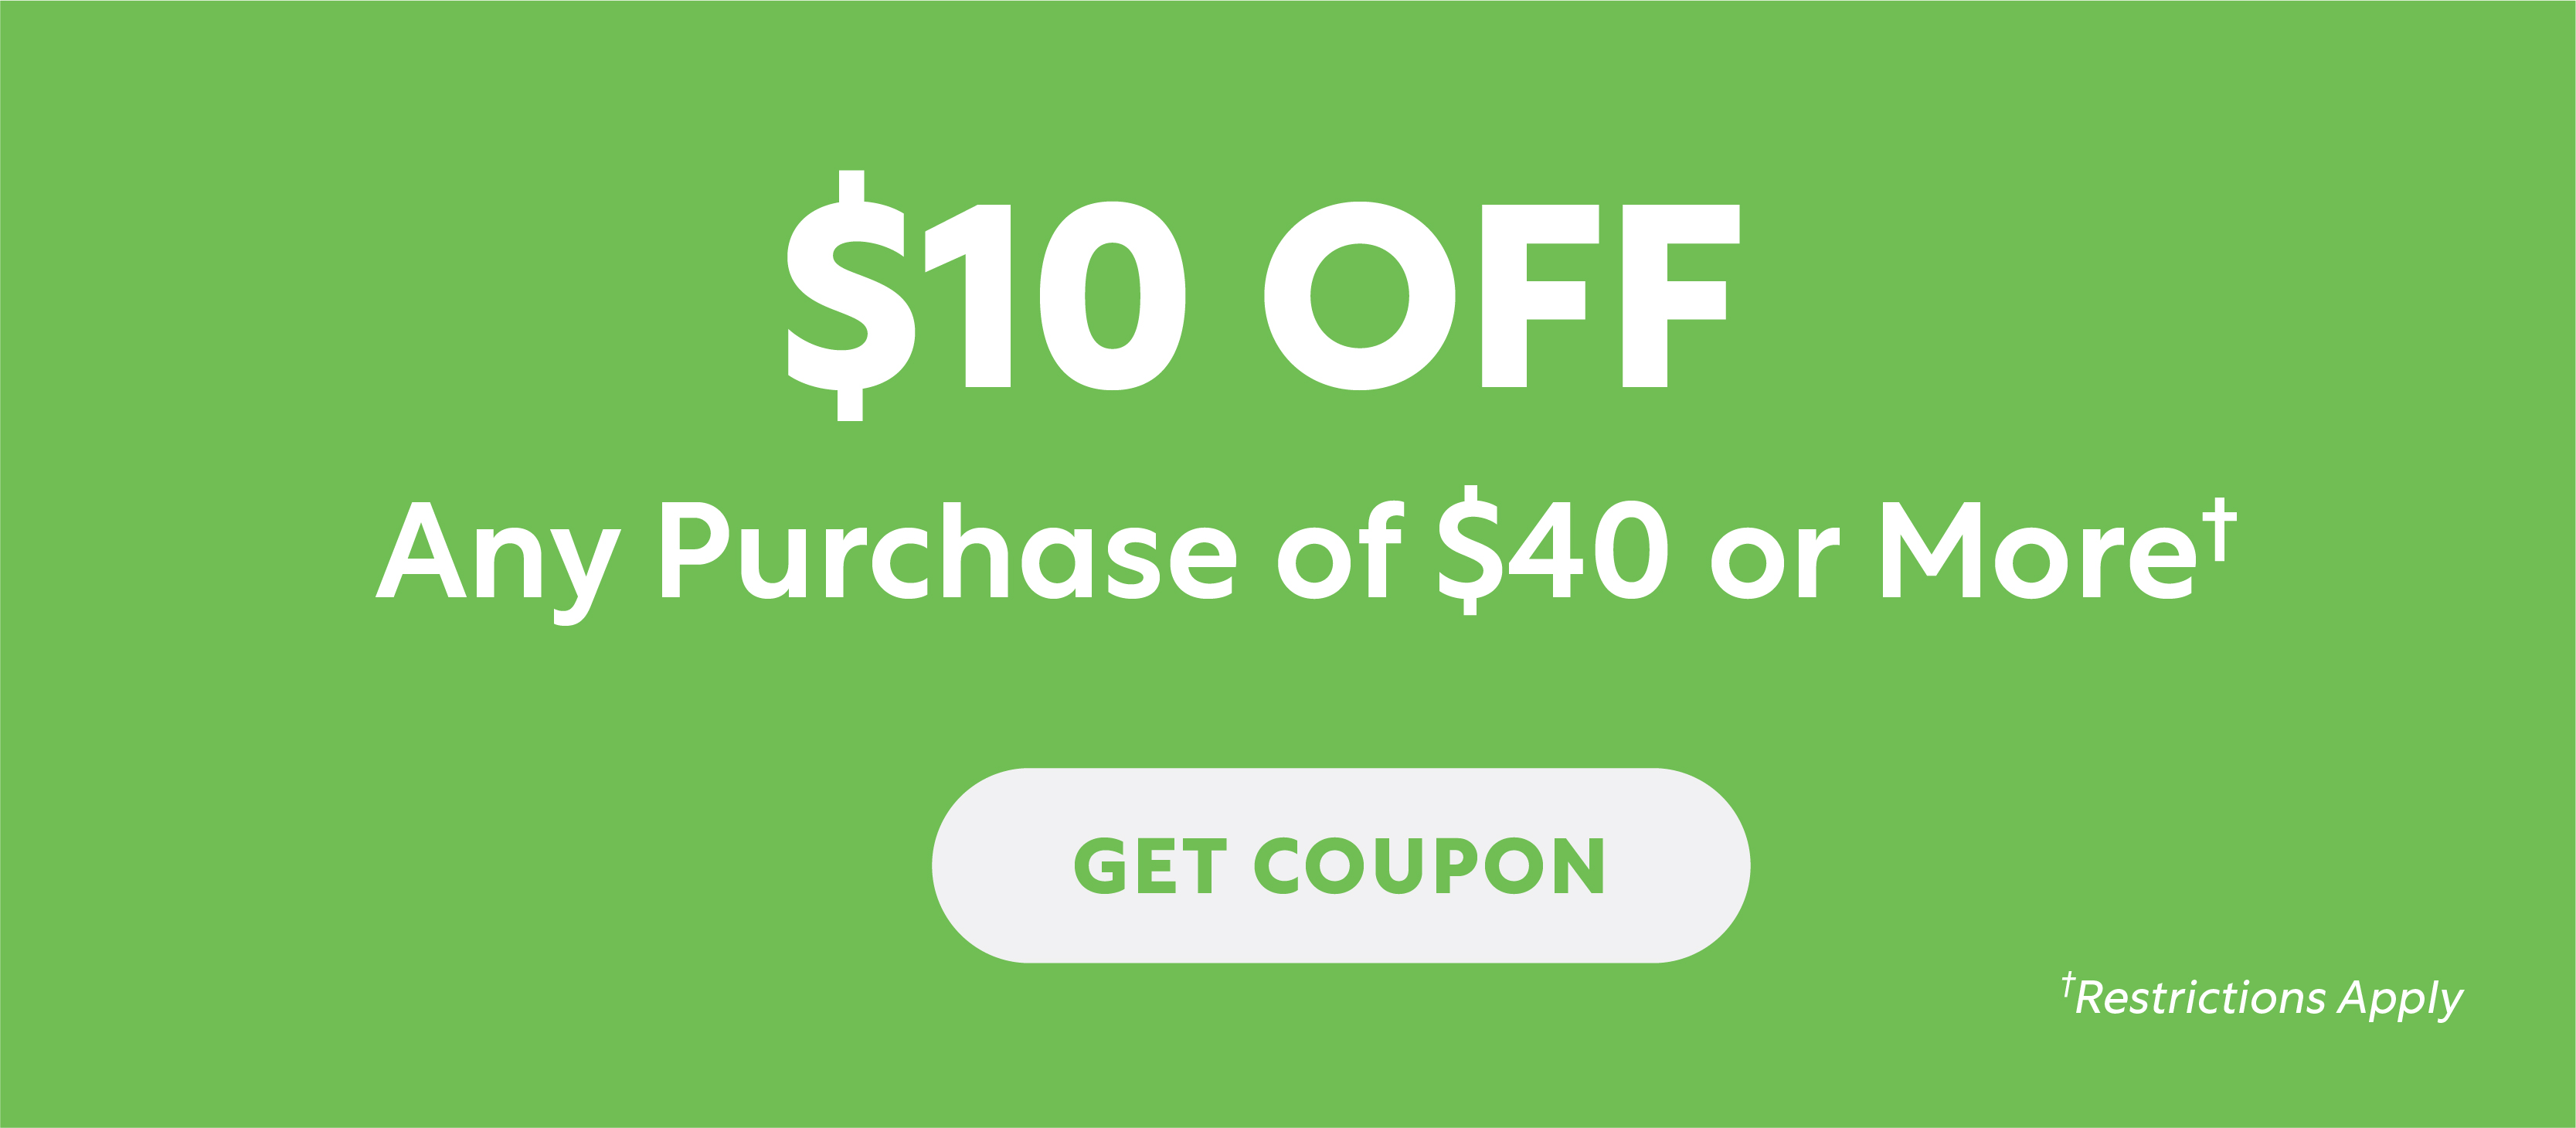 $10 OFF any purchase of $40 or More** - Get Coupon